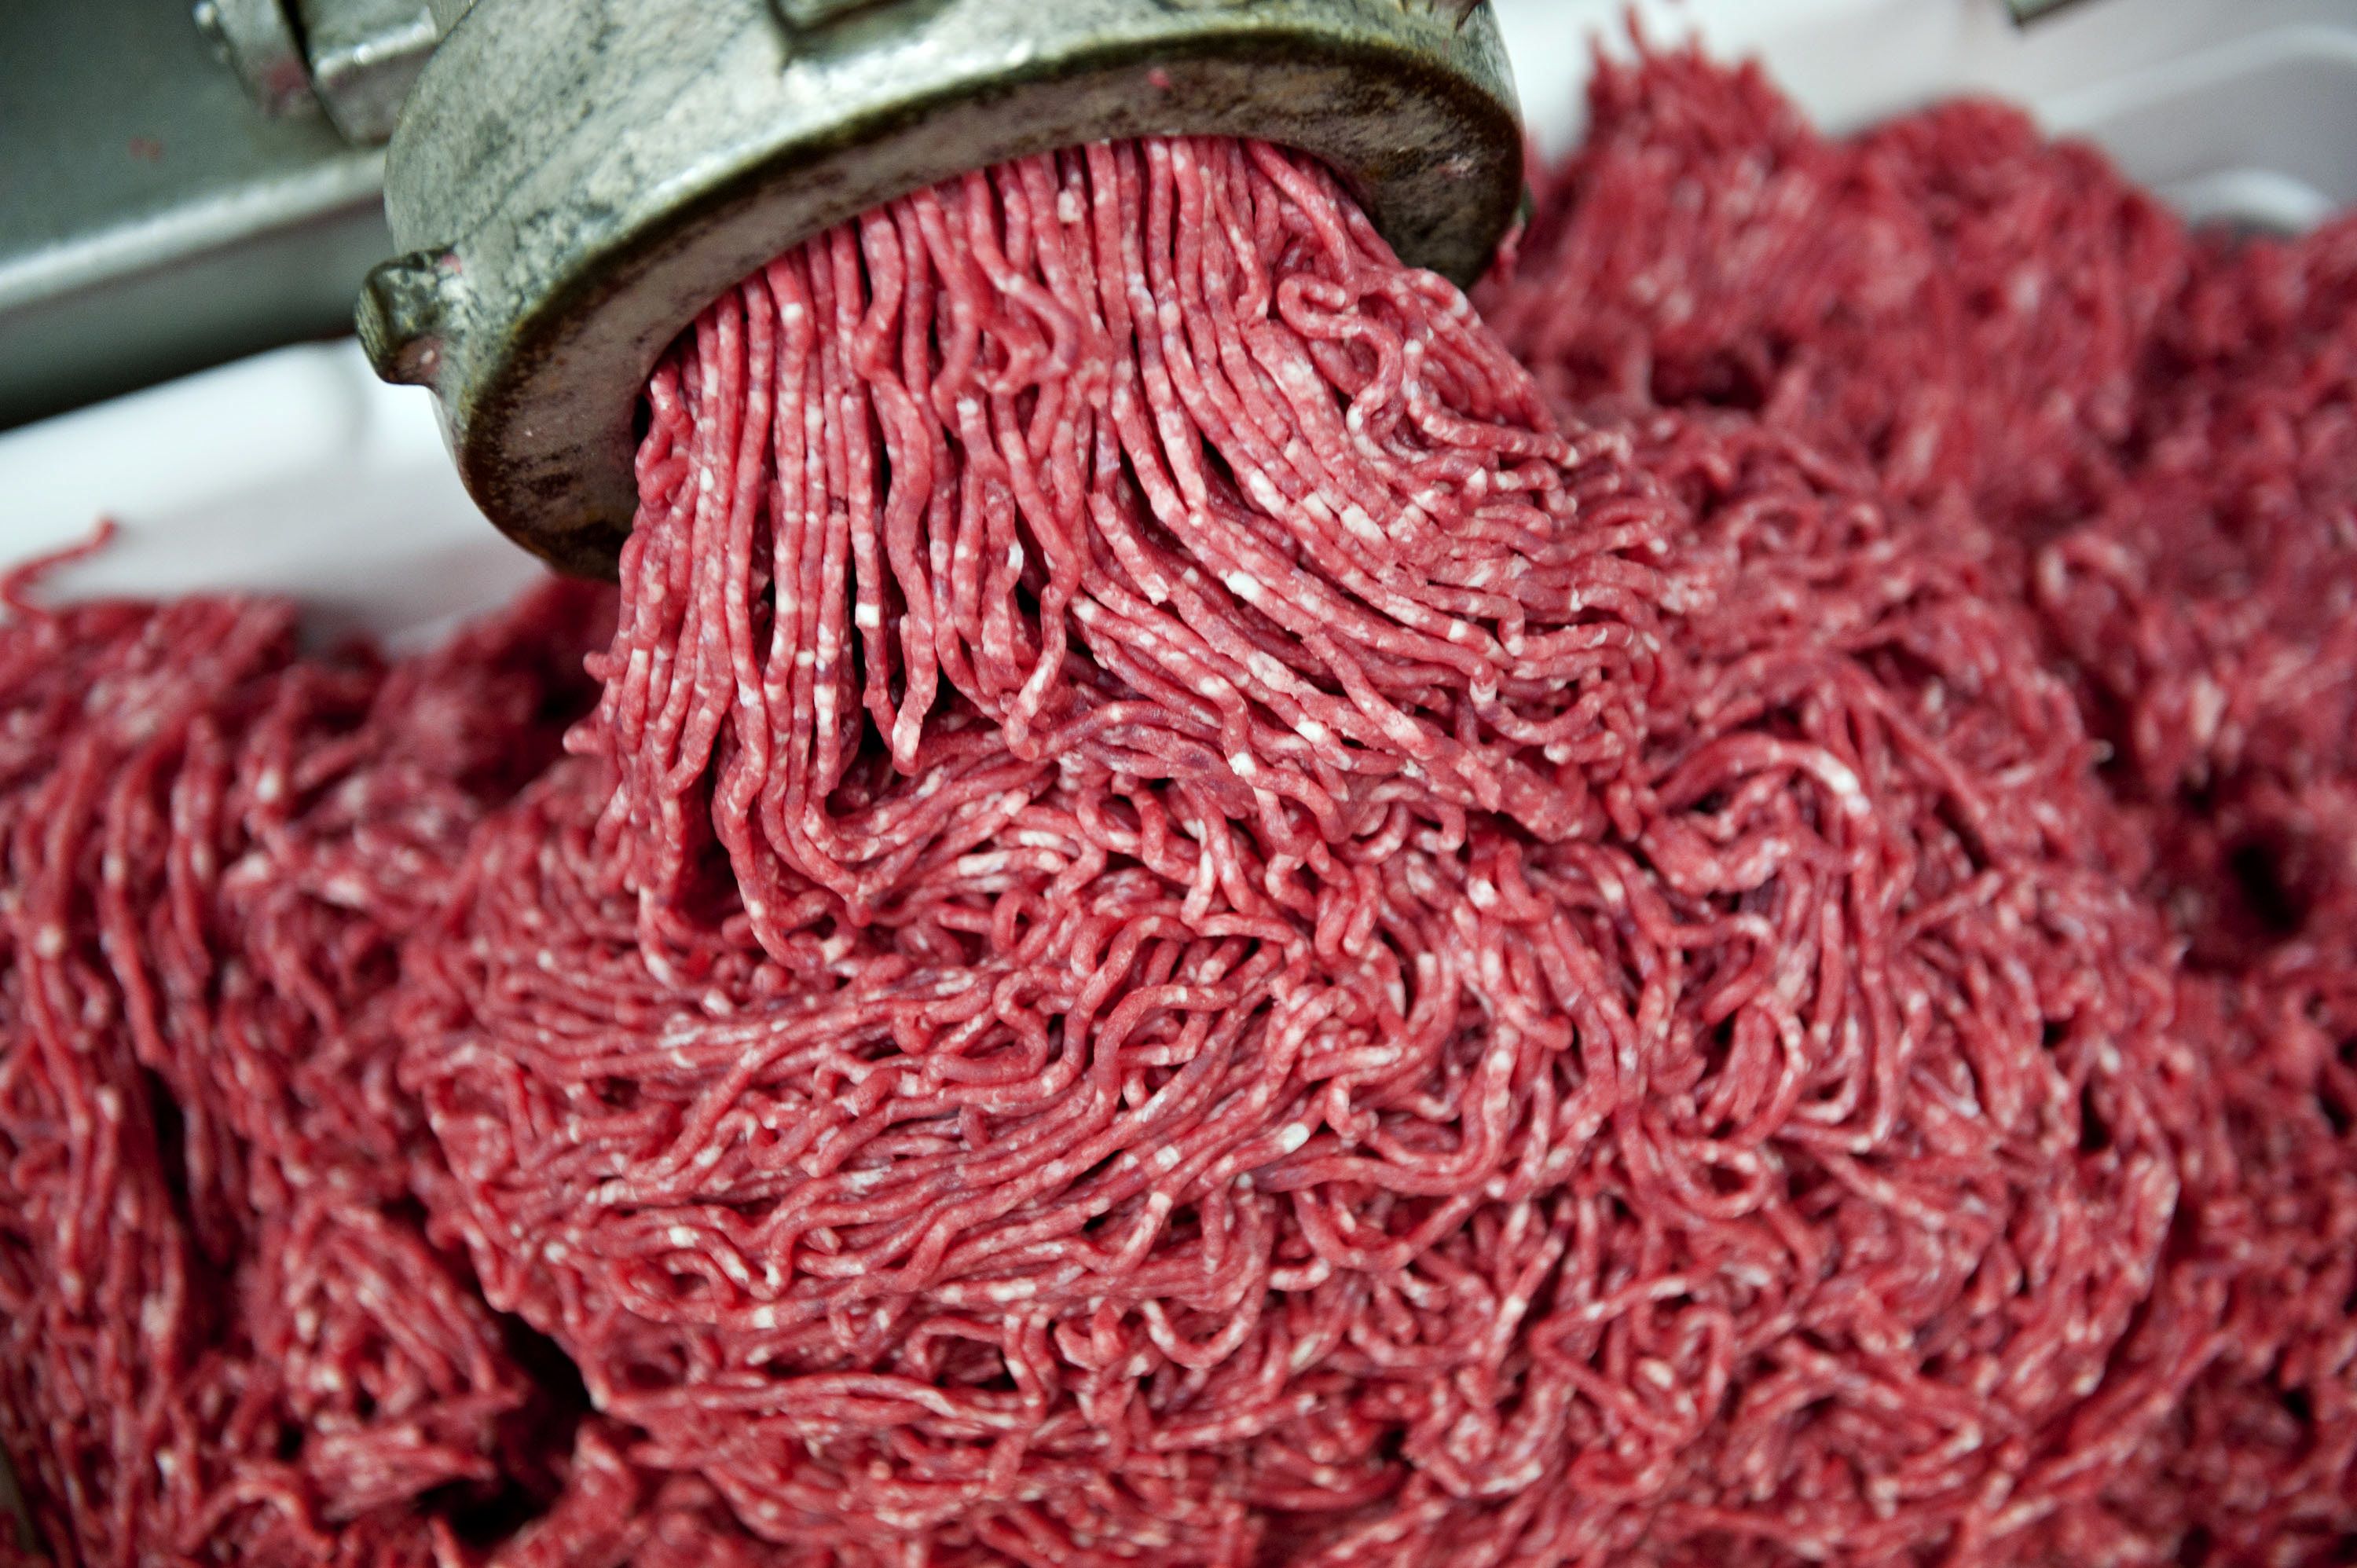 Outbreak associated with ground beef due to Salmonella Dublin